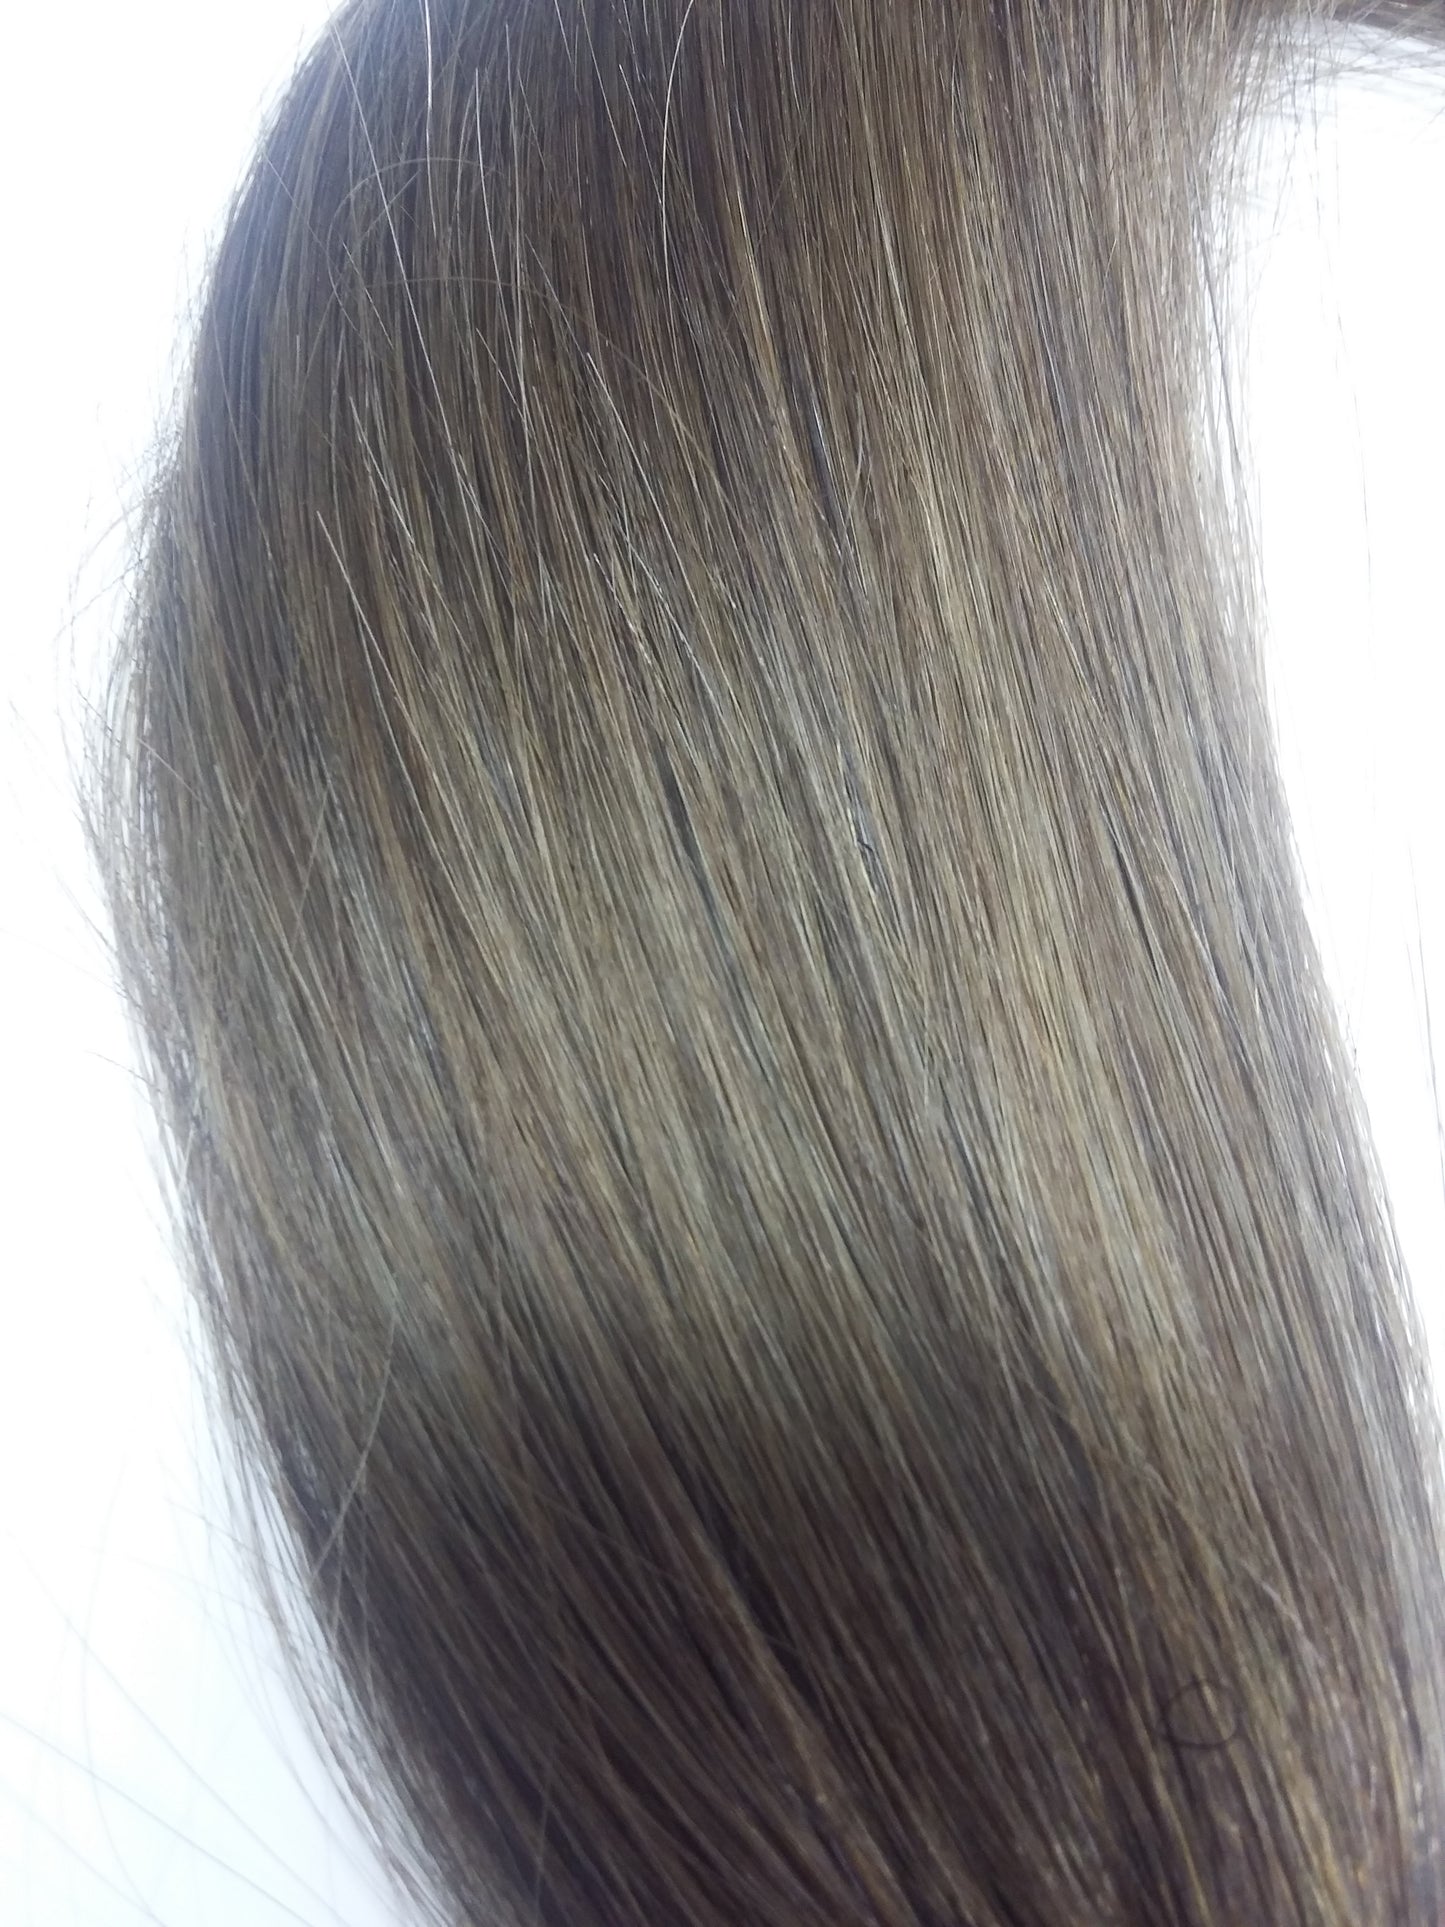 Russian Virgin Remy Human Hair, Nano Ring Extensions, Straight, 20'', Colour 4 . Quick Shipping!